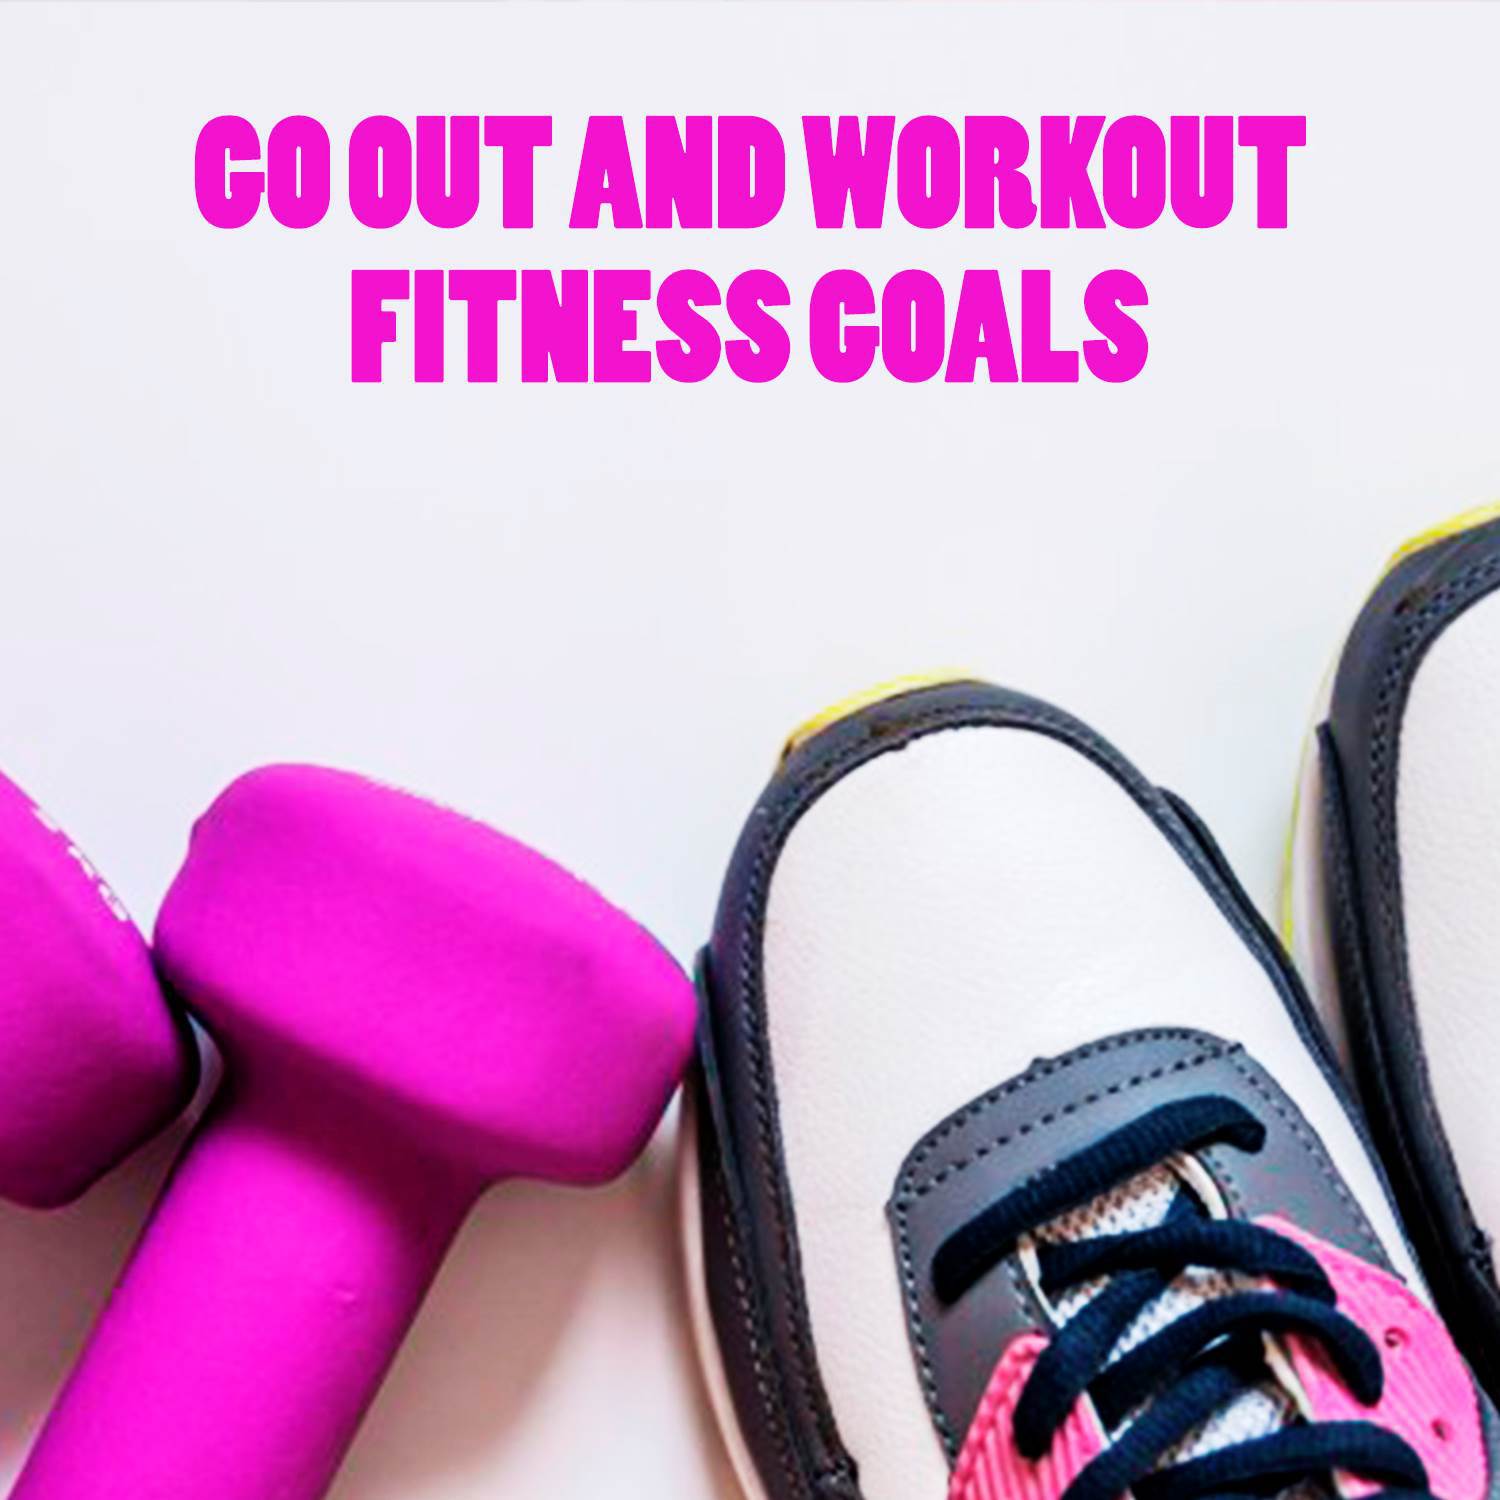 Go Out And Workout